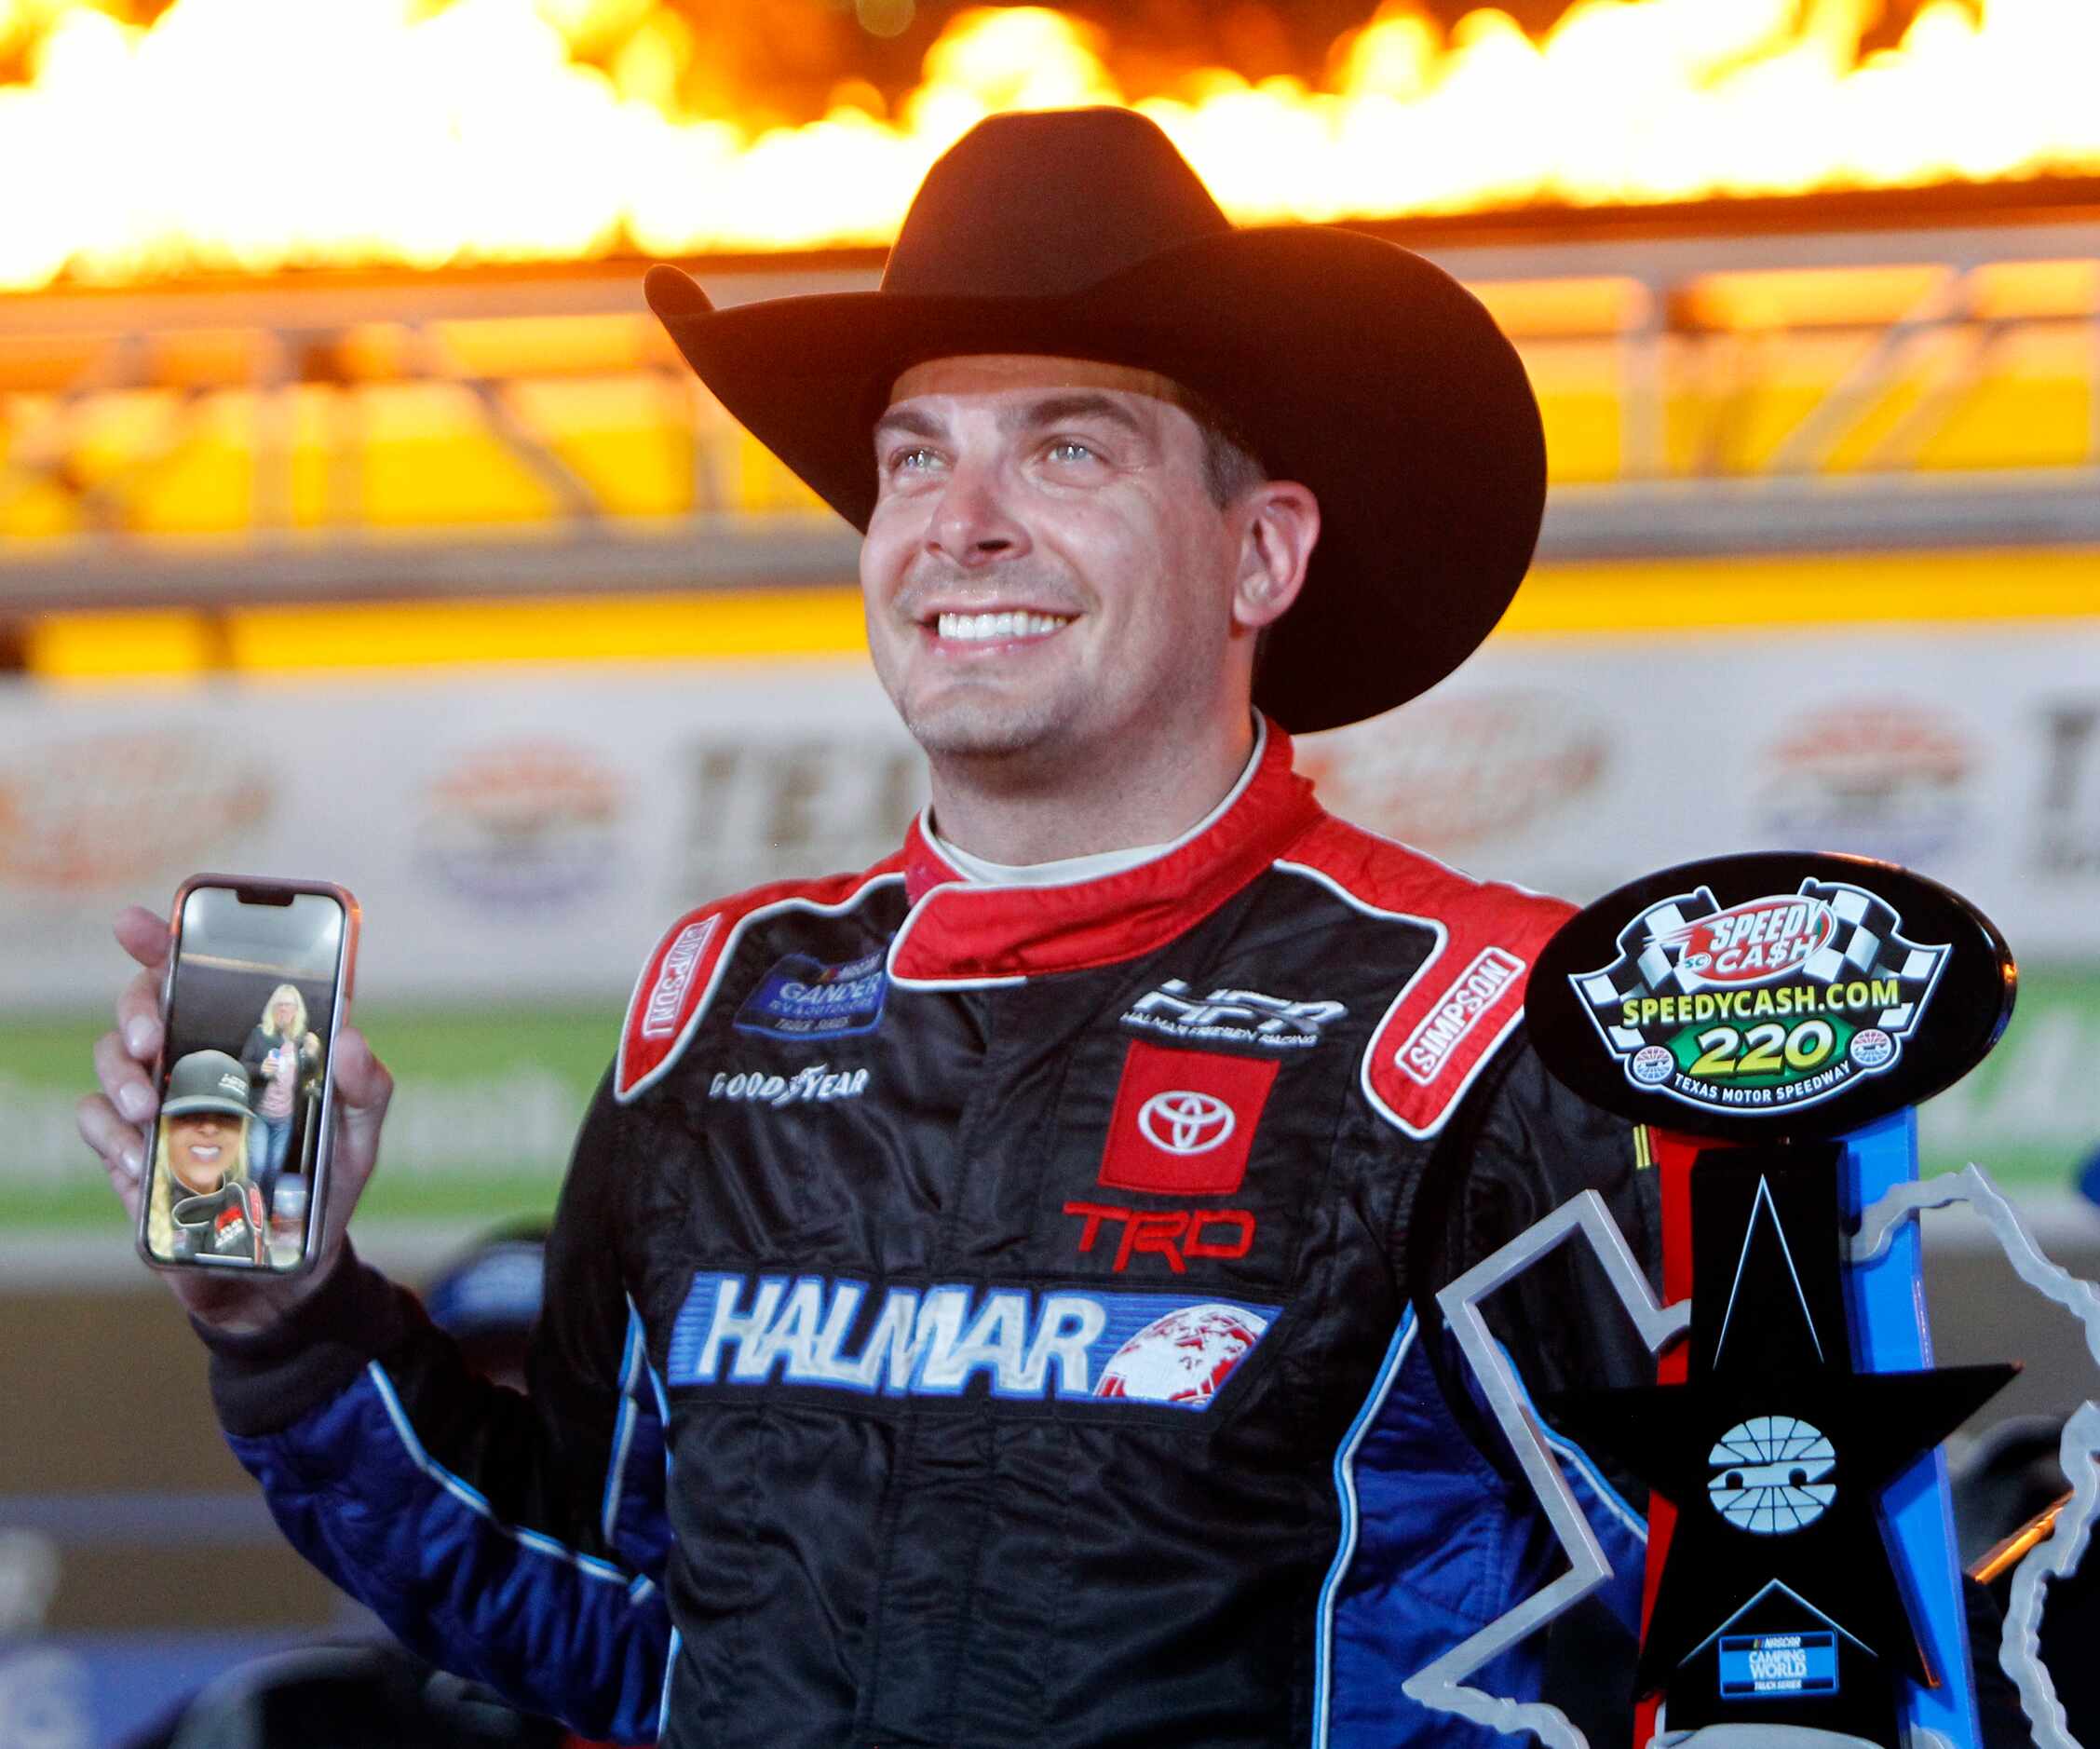 Through the magic of technology, Stewart Friesen is able to share a celebratory moment with...